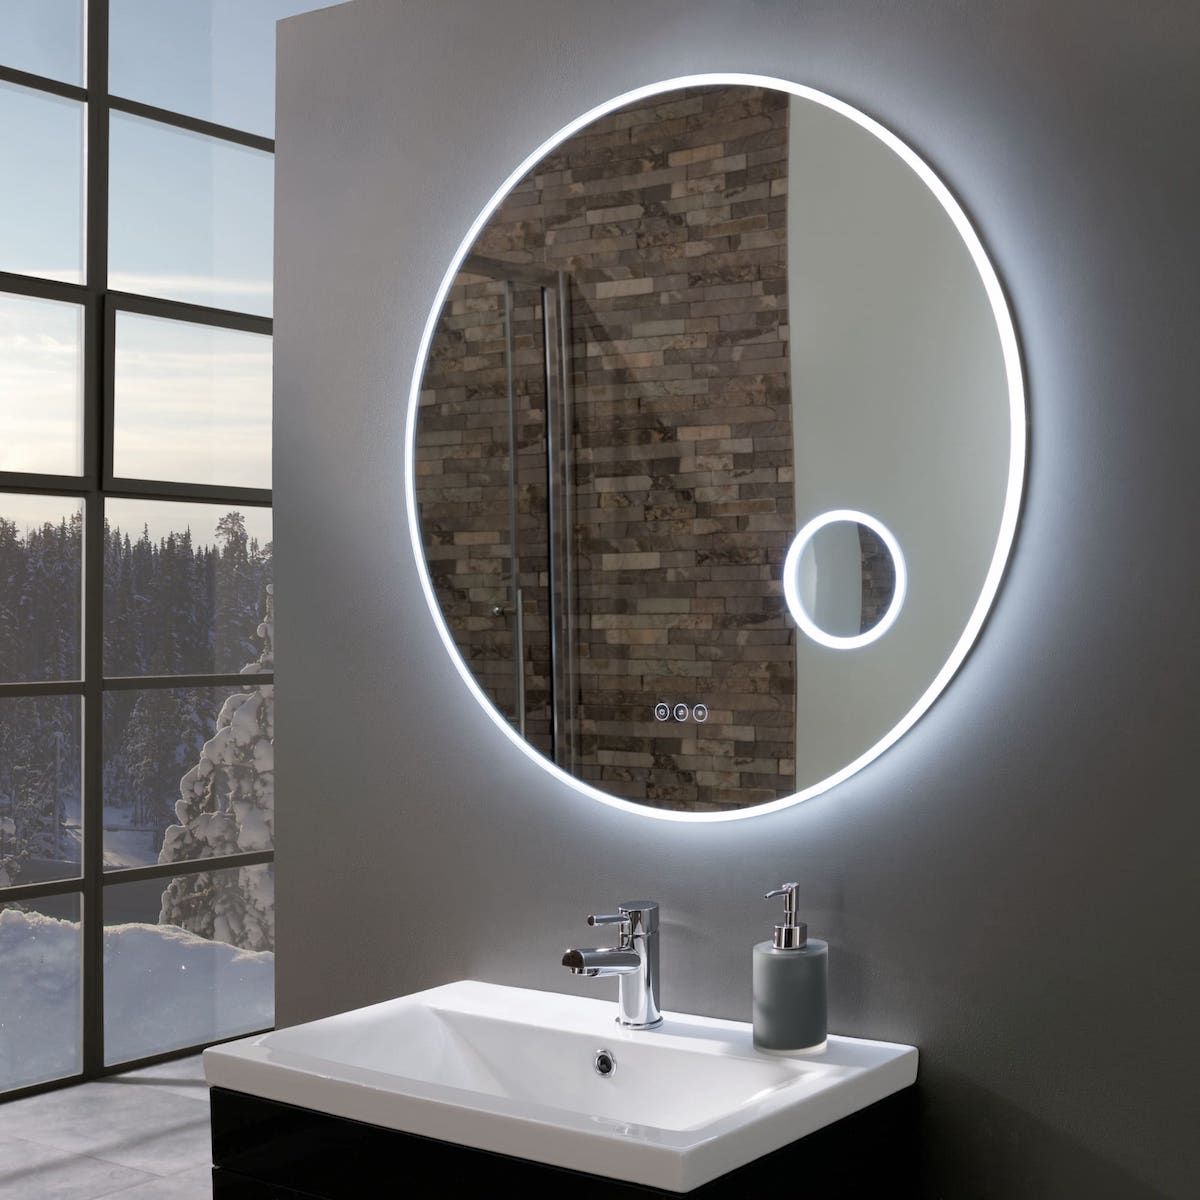 Ultra Slim Round Led Illuminated Mirror, Bathroom Mirror With Built In Magnifier